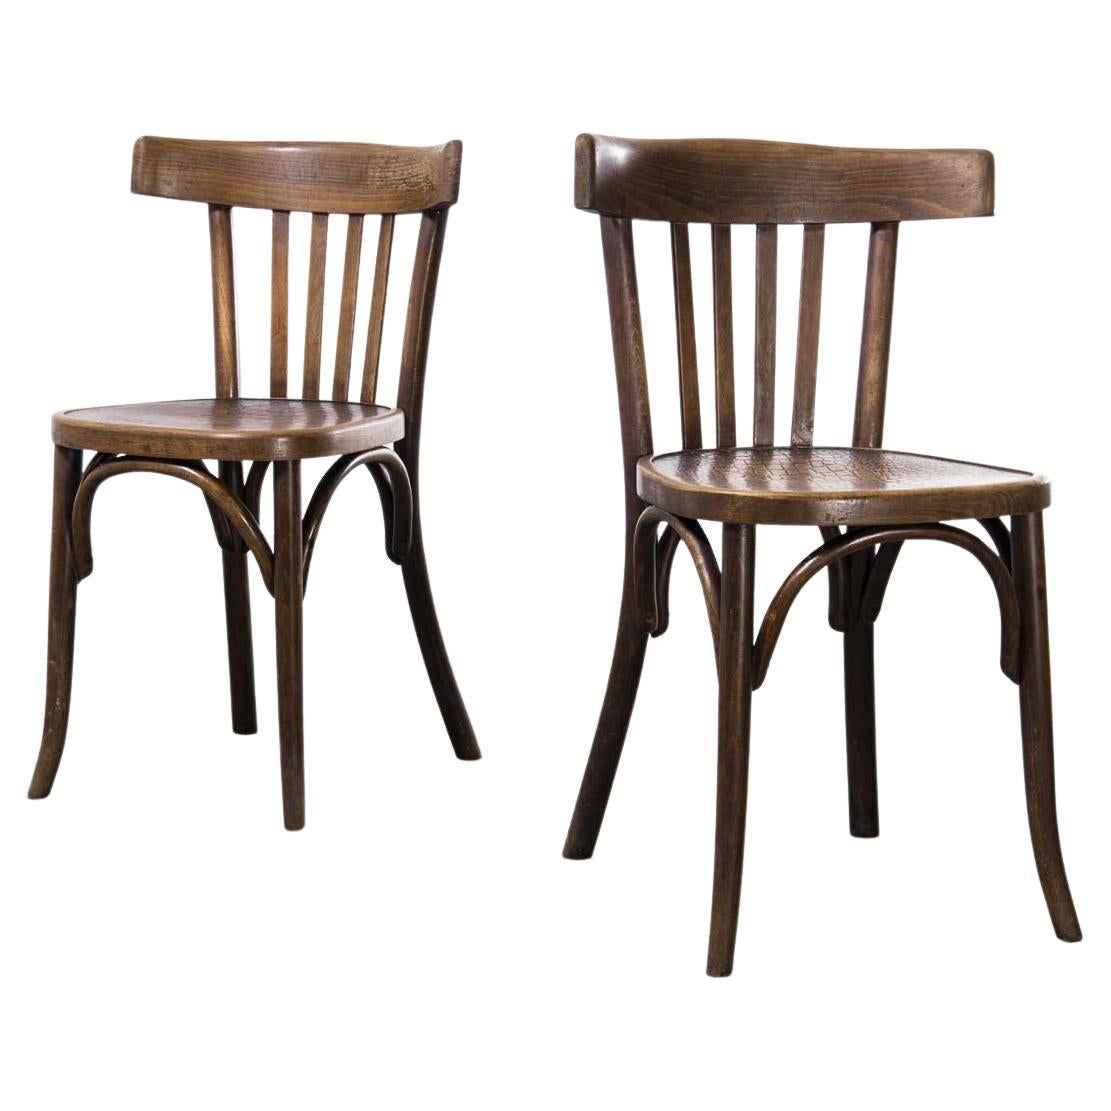 1940's Pair of Fischel Bentwood Chairs, Patterned Seat For Sale at 1stDibs